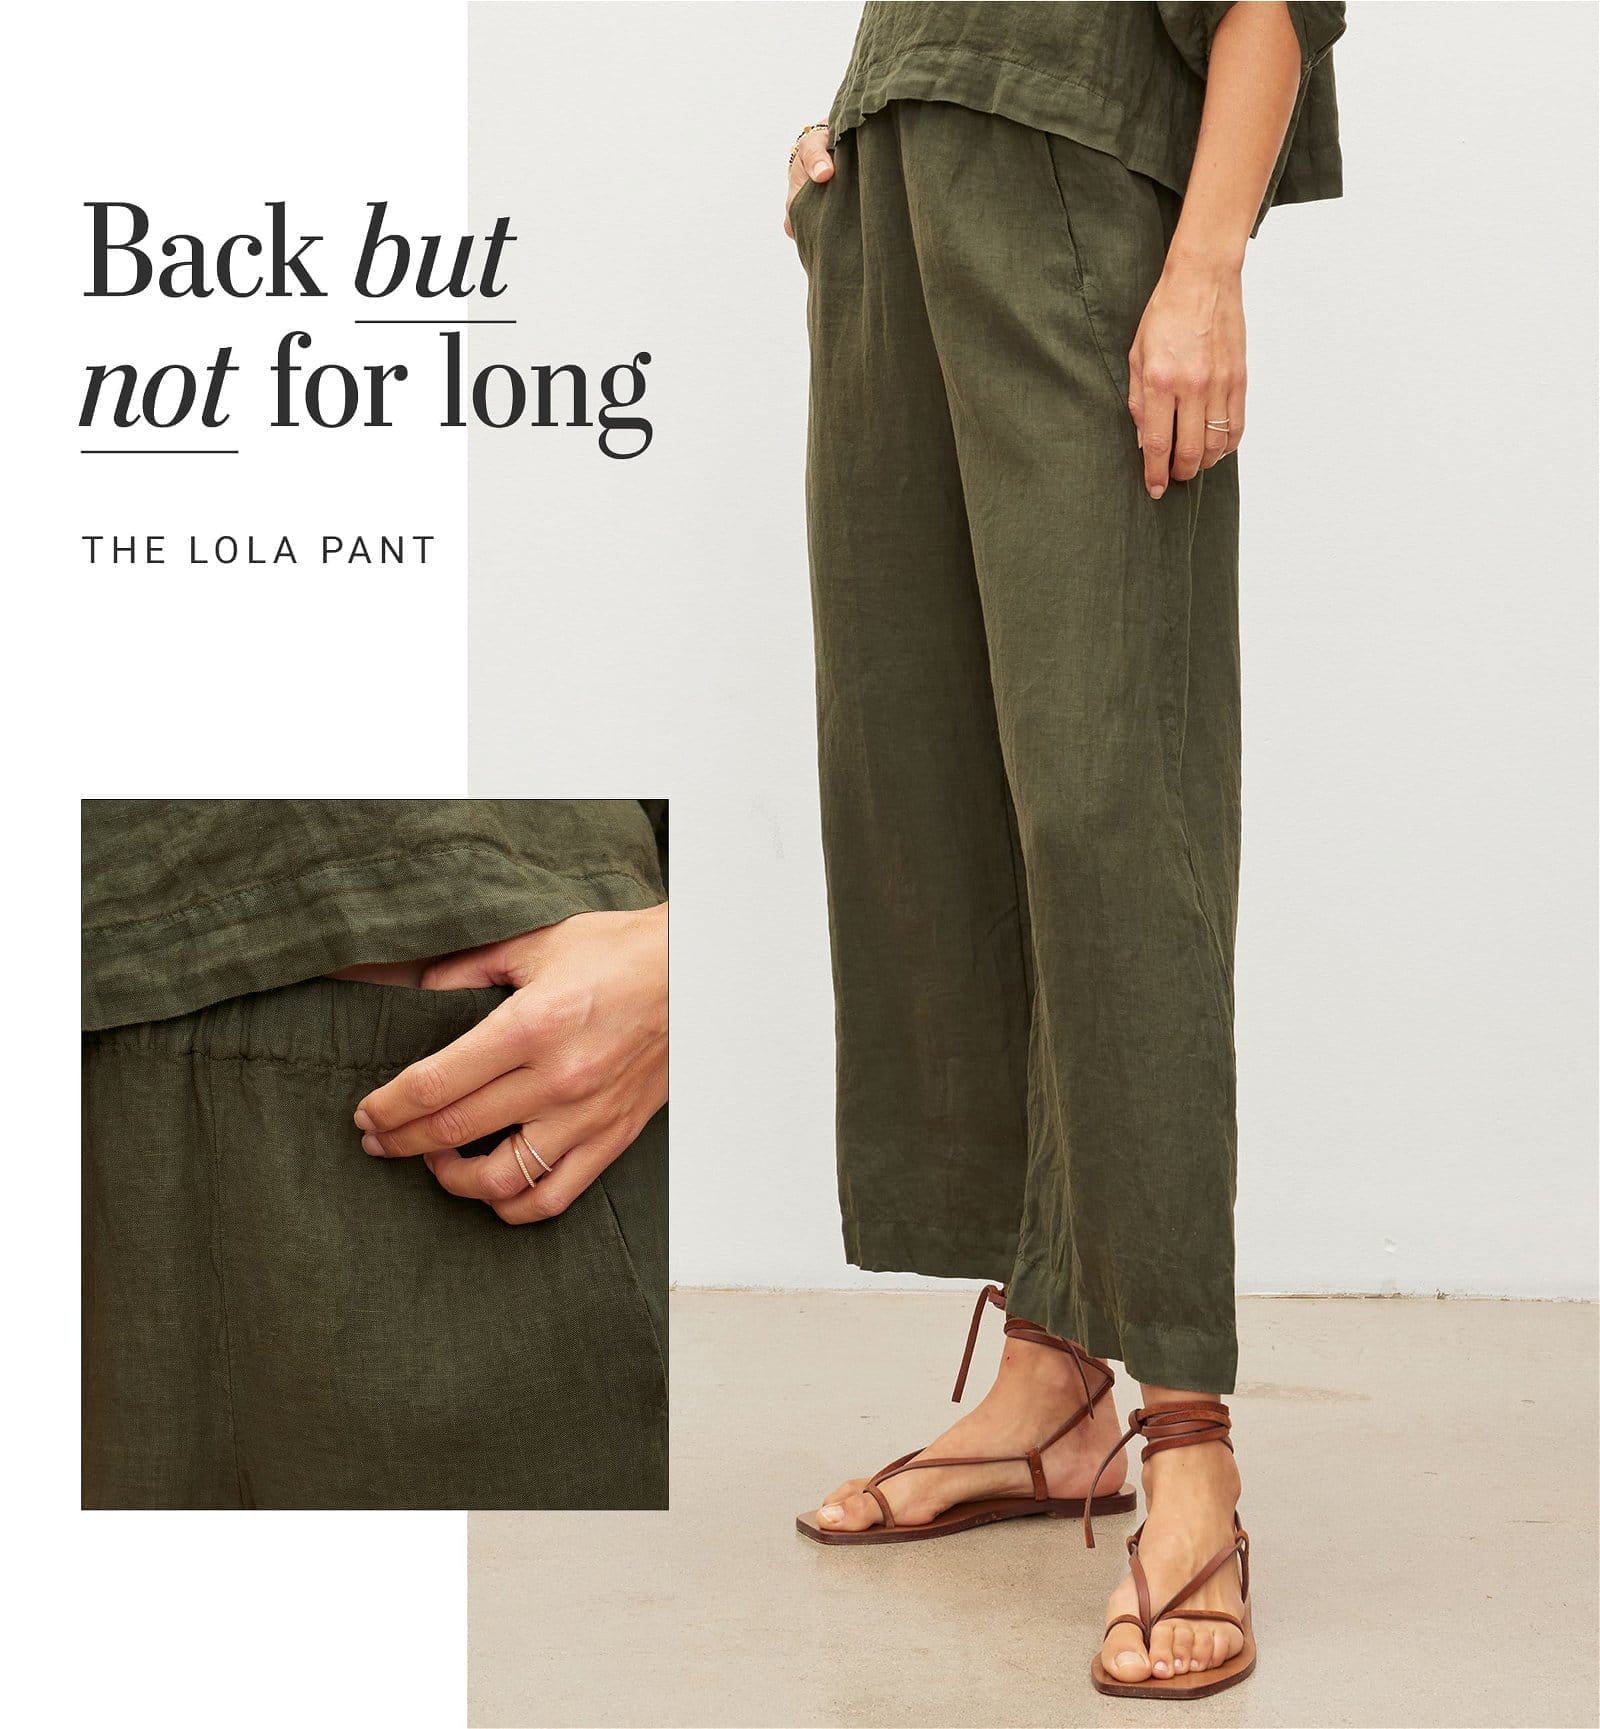 Back but not for long! The Lola Pant